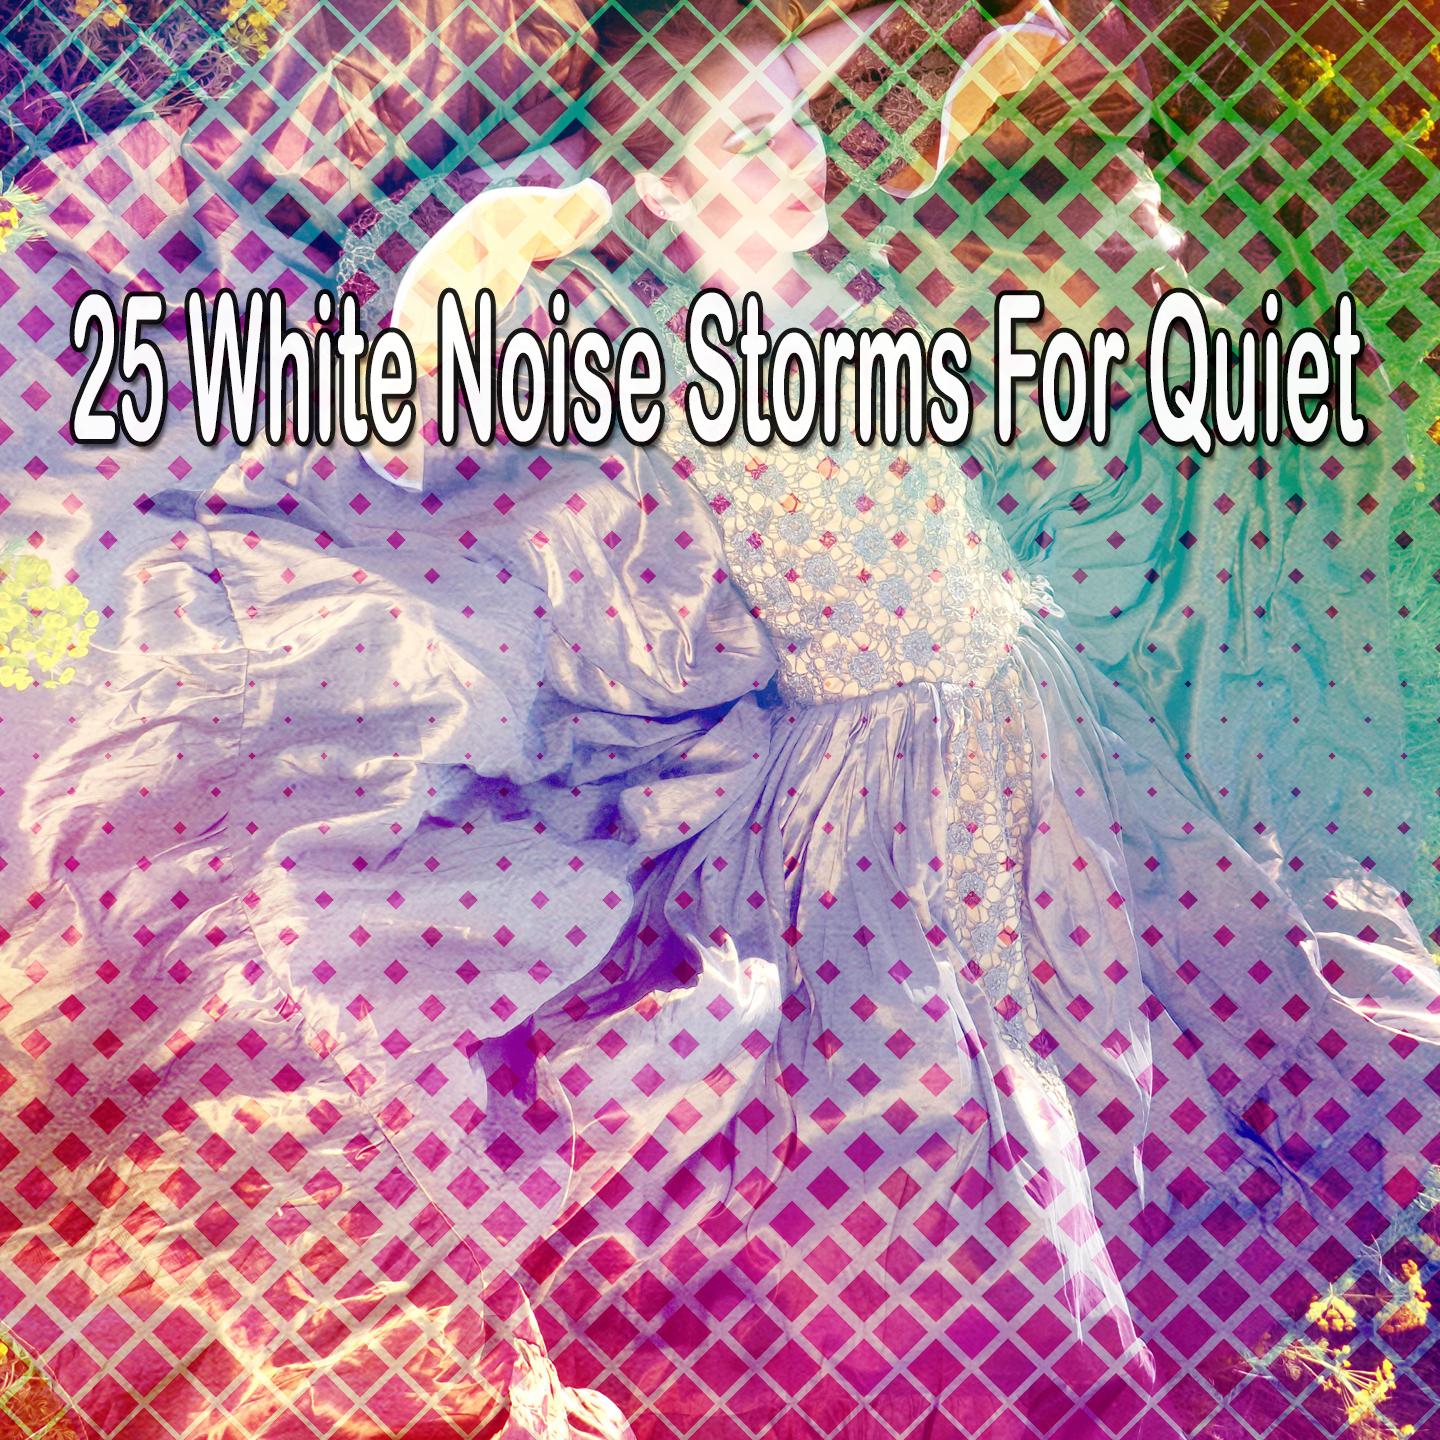 25 White Noise Storms For Quiet